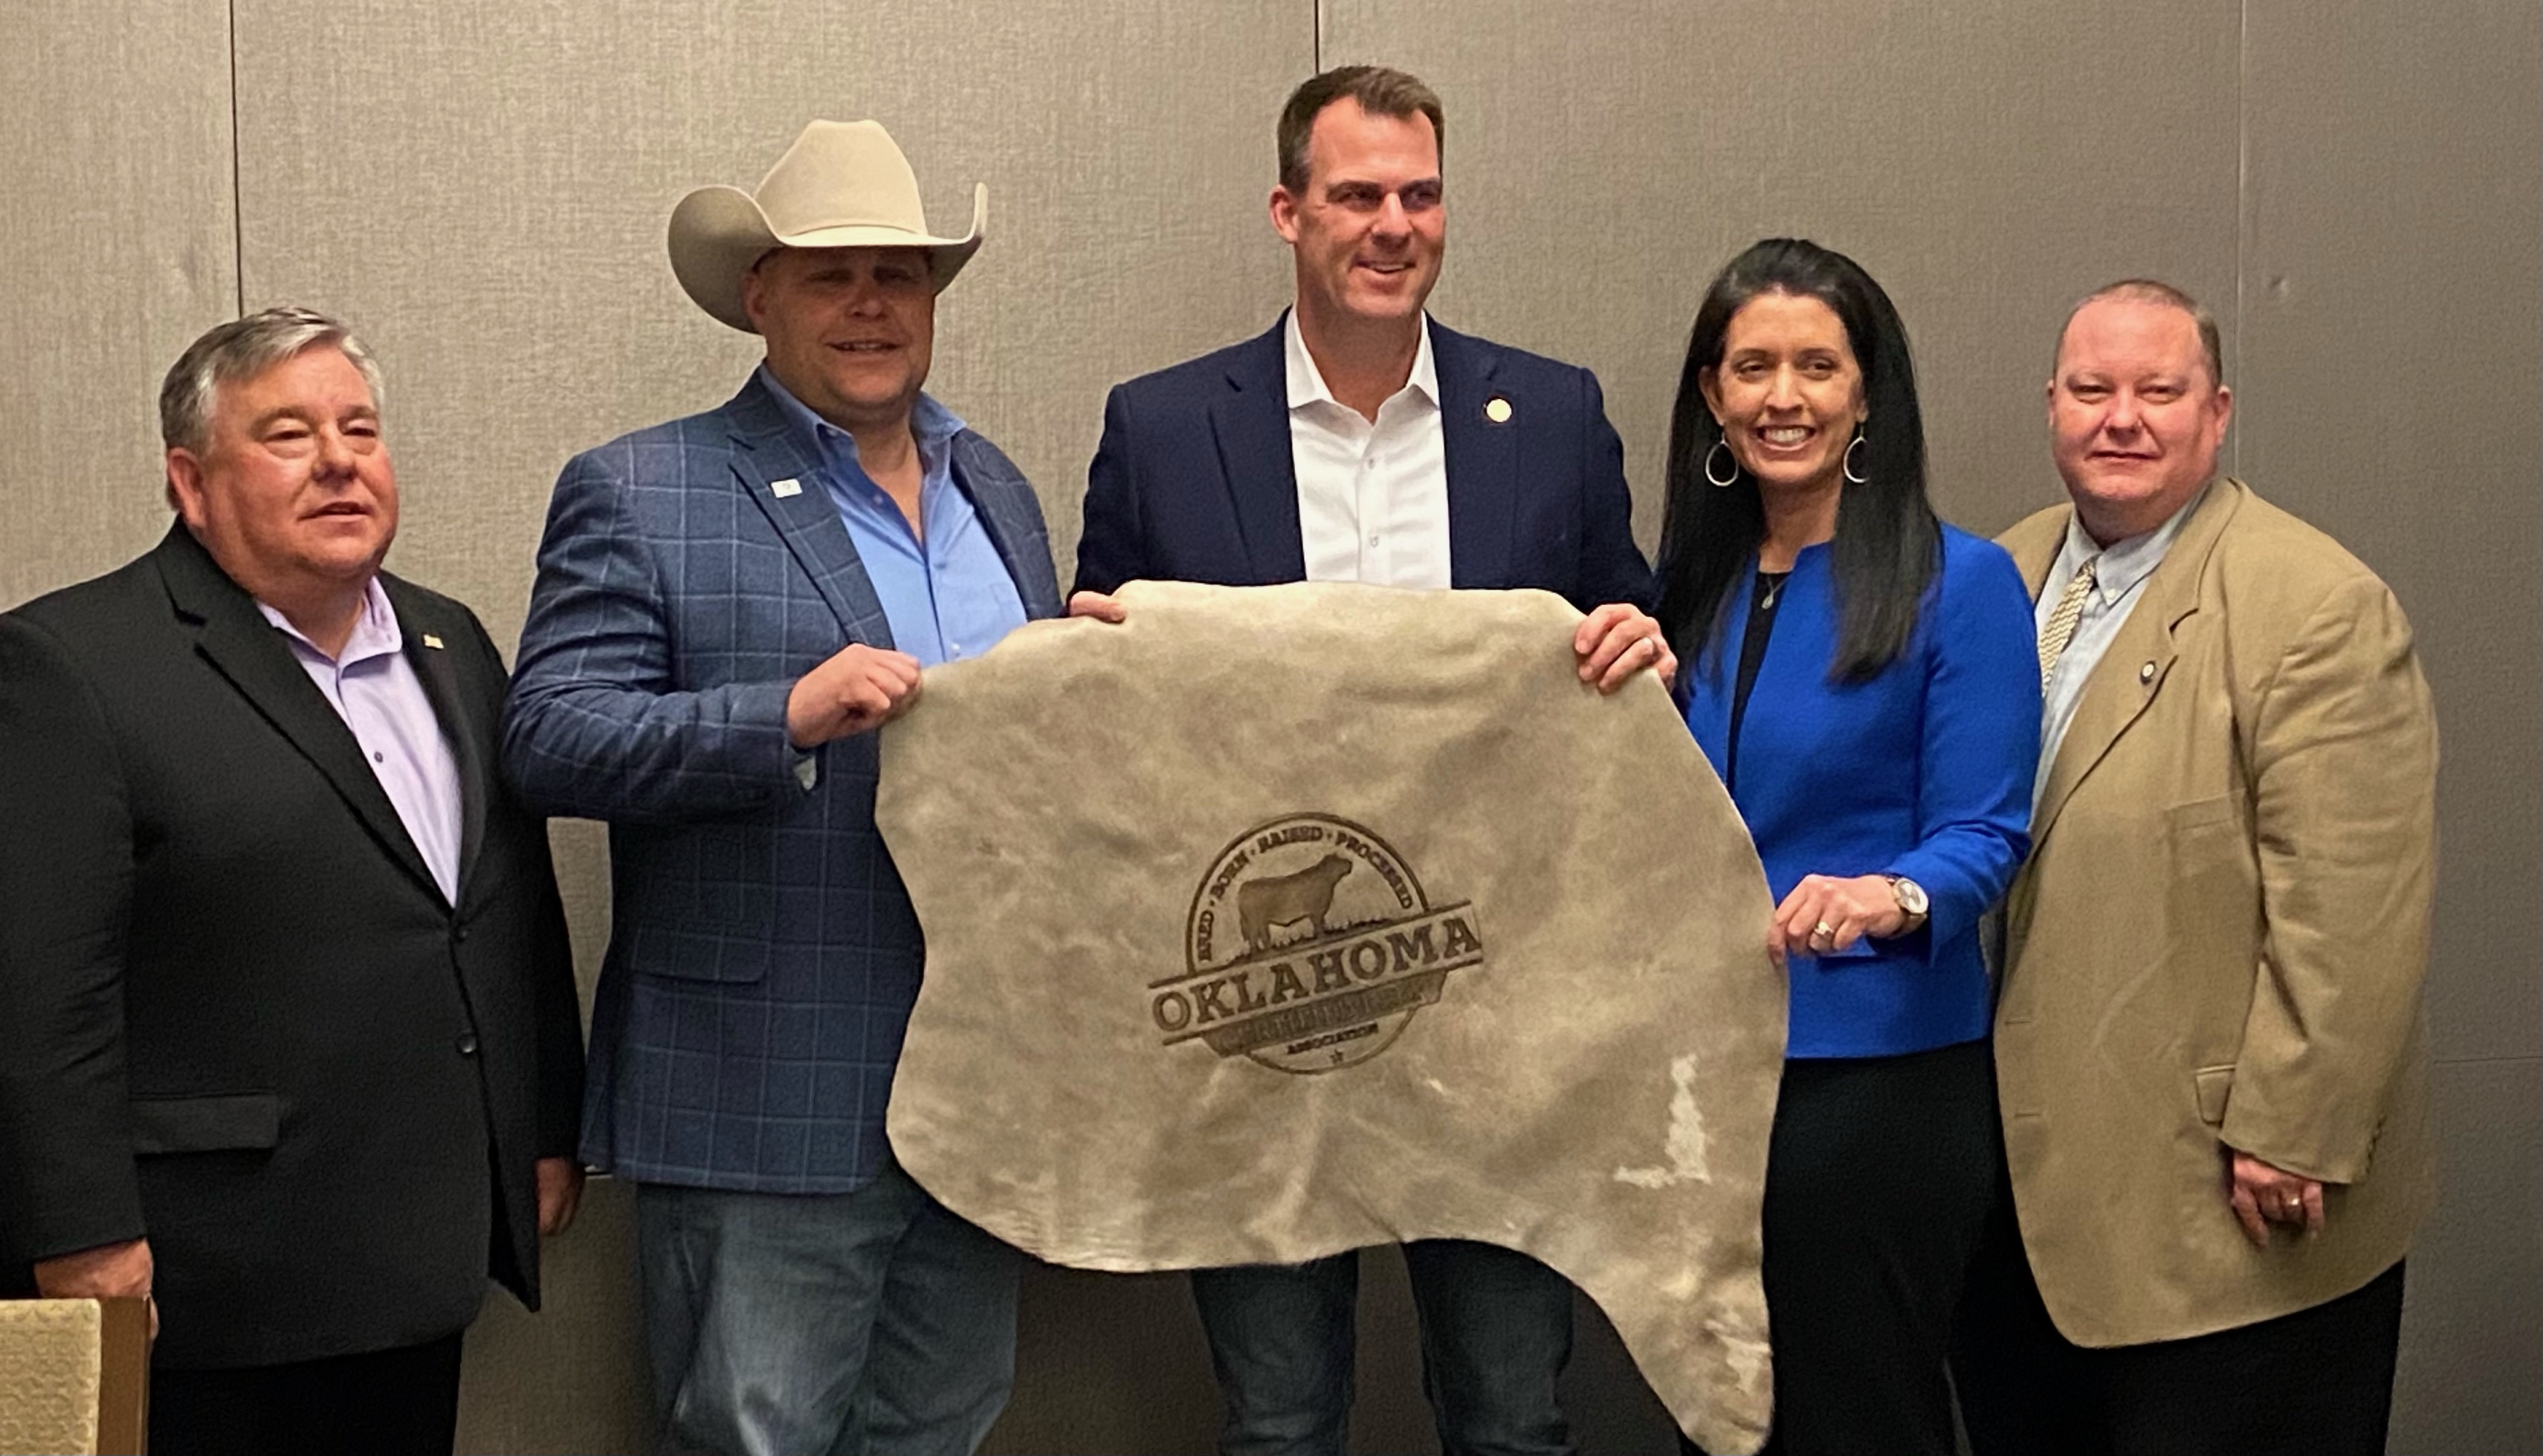 Governor Stitt And Other State Leaders Enjoy First Official OCBA Ribeye Steak During Kickoff Event Feb. 4